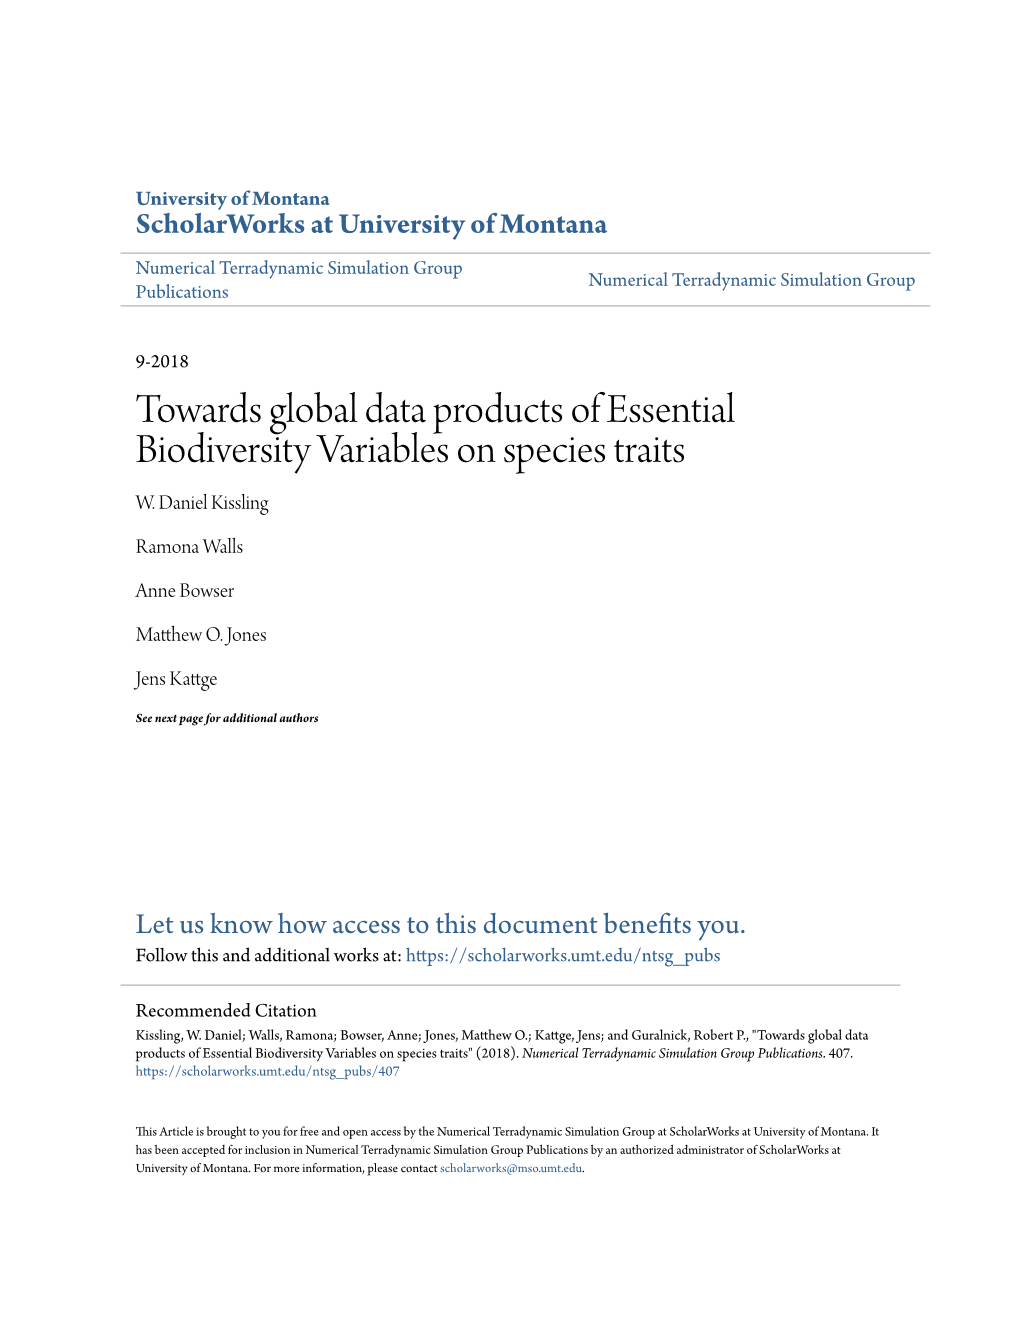 Towards Global Data Products of Essential Biodiversity Variables on Species Traits W